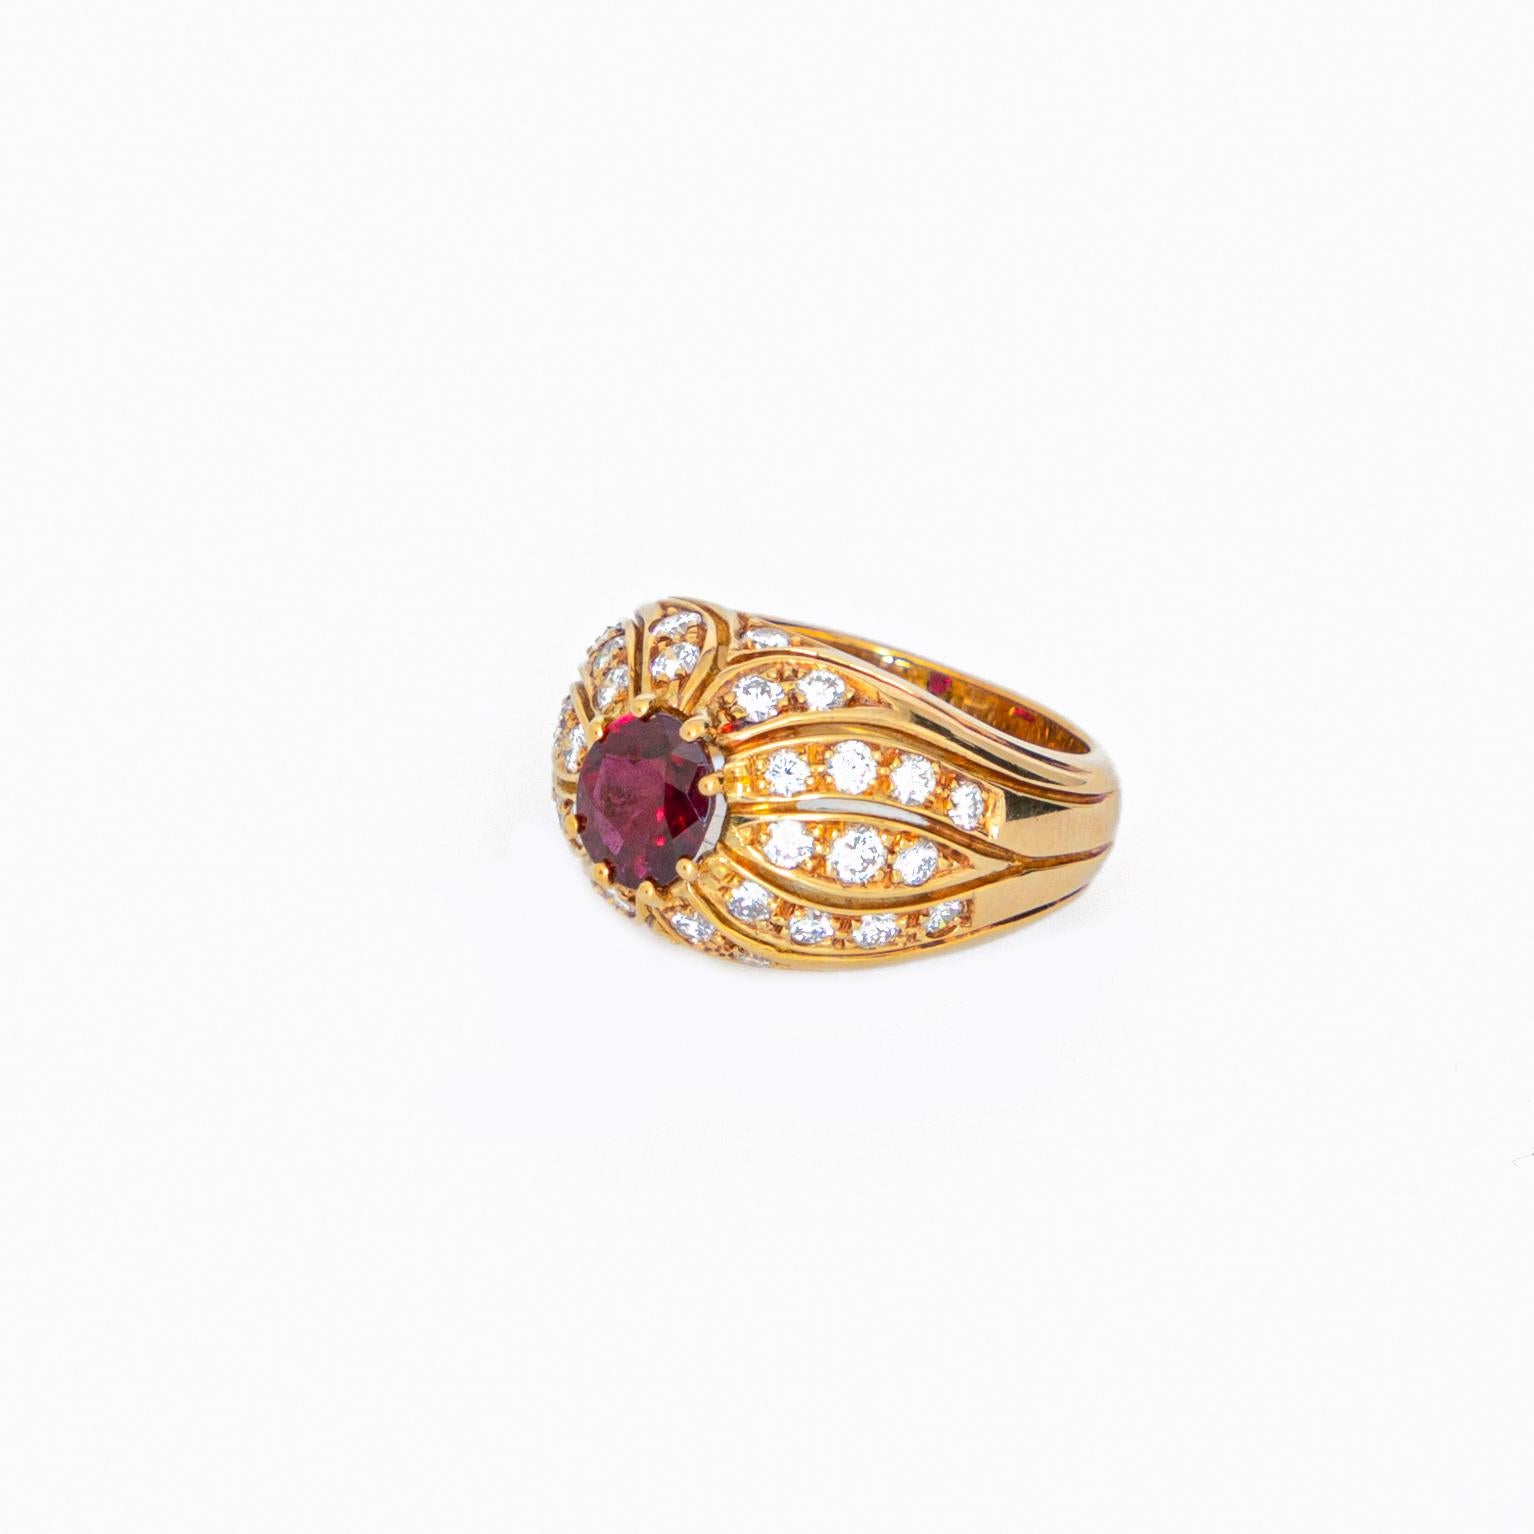 This extraordinary diamond cluster ring features princess diamonds and a round ruby. All artfully set and crafted in 18k yellow gold to create this stunning piece of jewelry. This artwork is for a diamond woman.

This design is inspired in the 1970